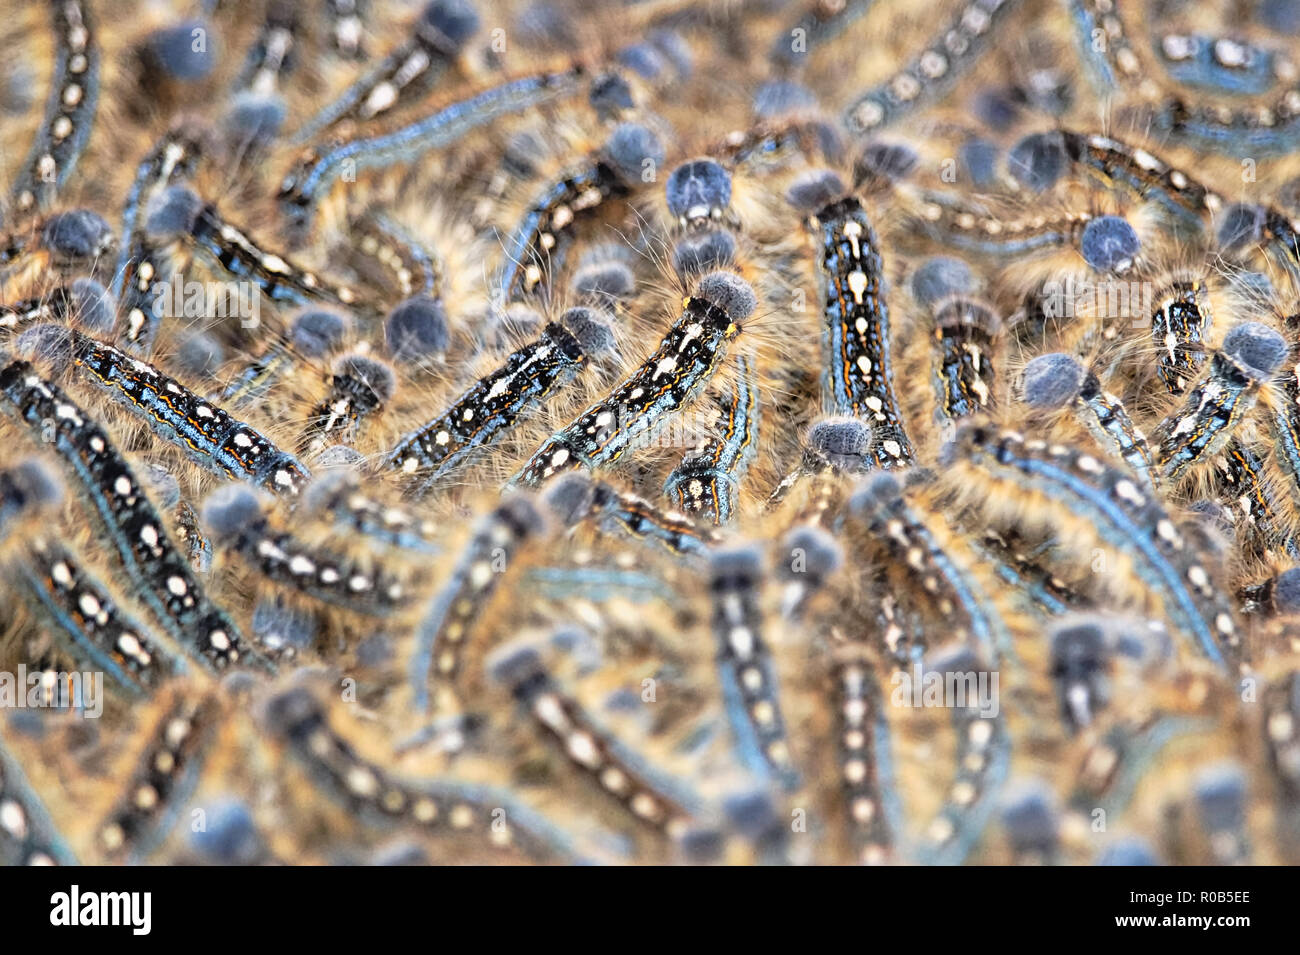 A mass of tent caterpillars moves together in a group Stock Photo